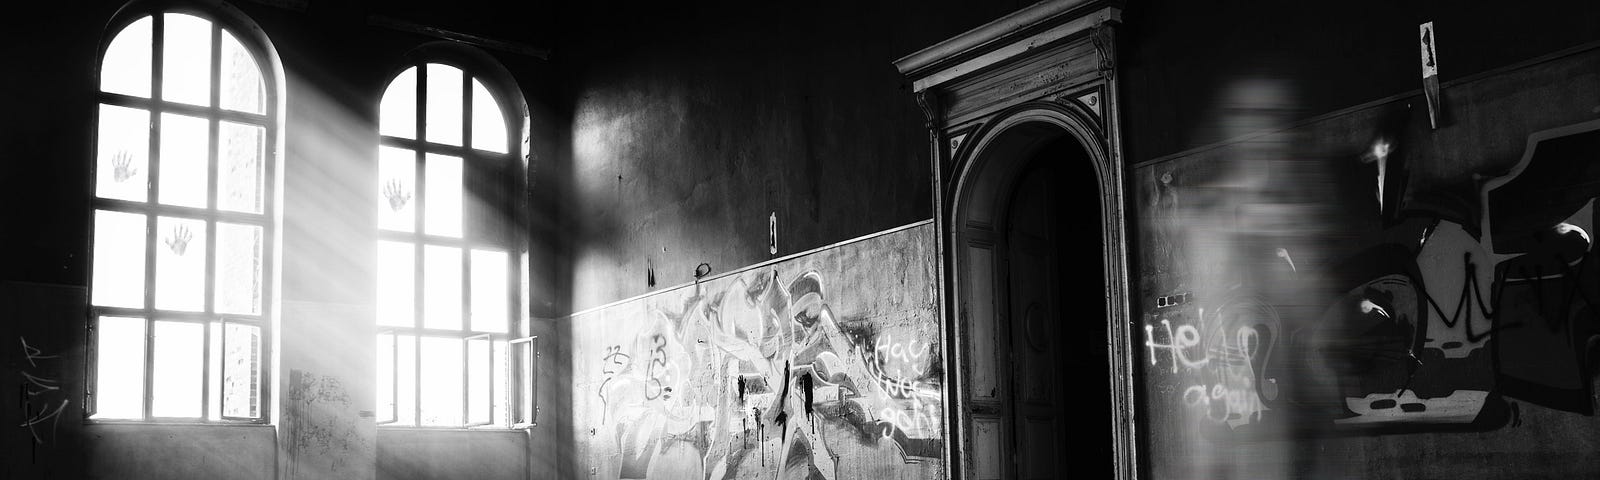 Greyscale photo of an abandoned room with the shadow of a figure standing off-centre